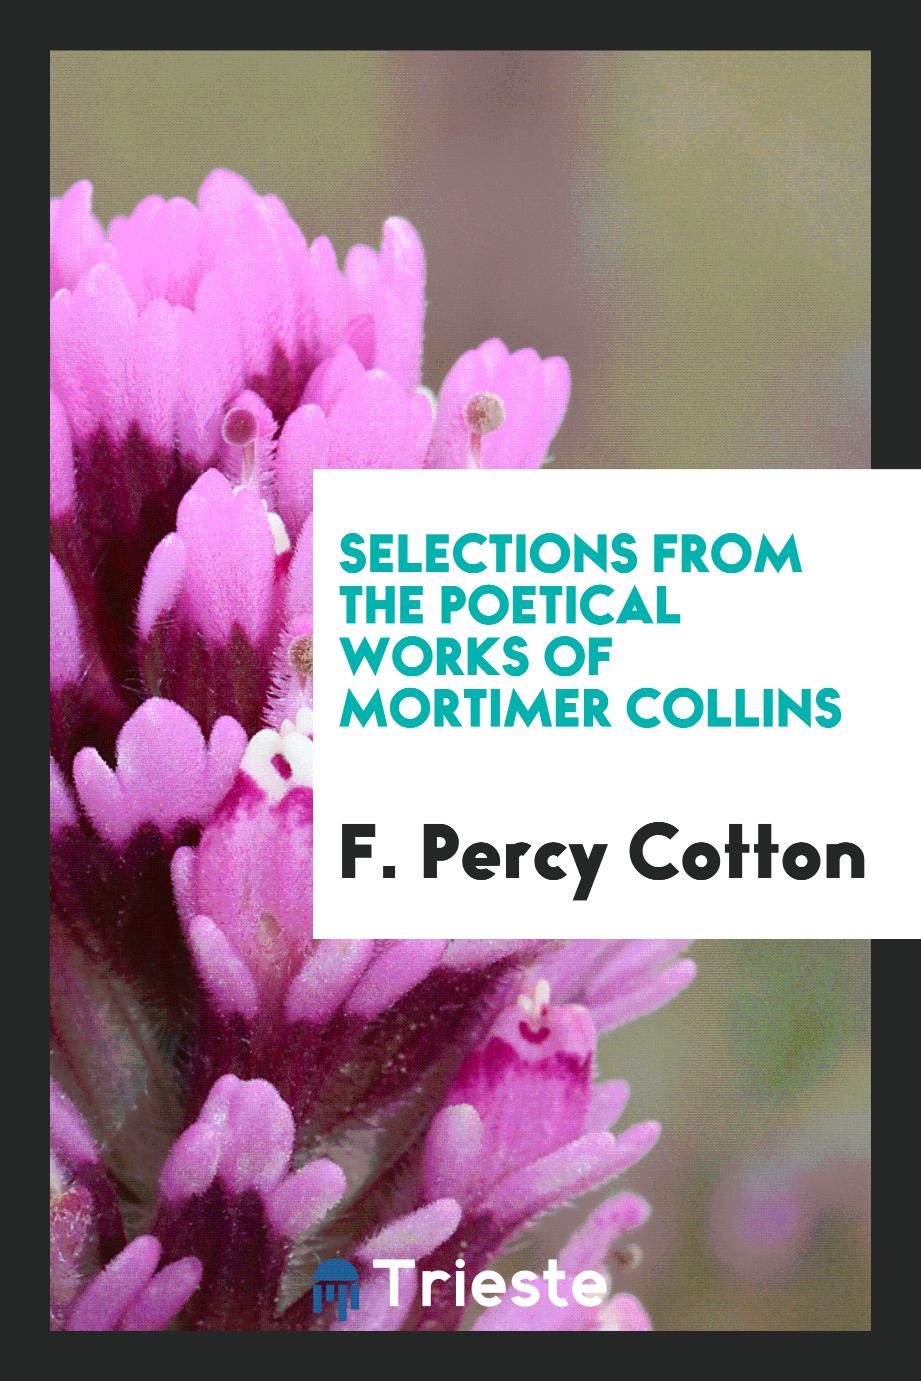 Selections from the poetical works of Mortimer Collins